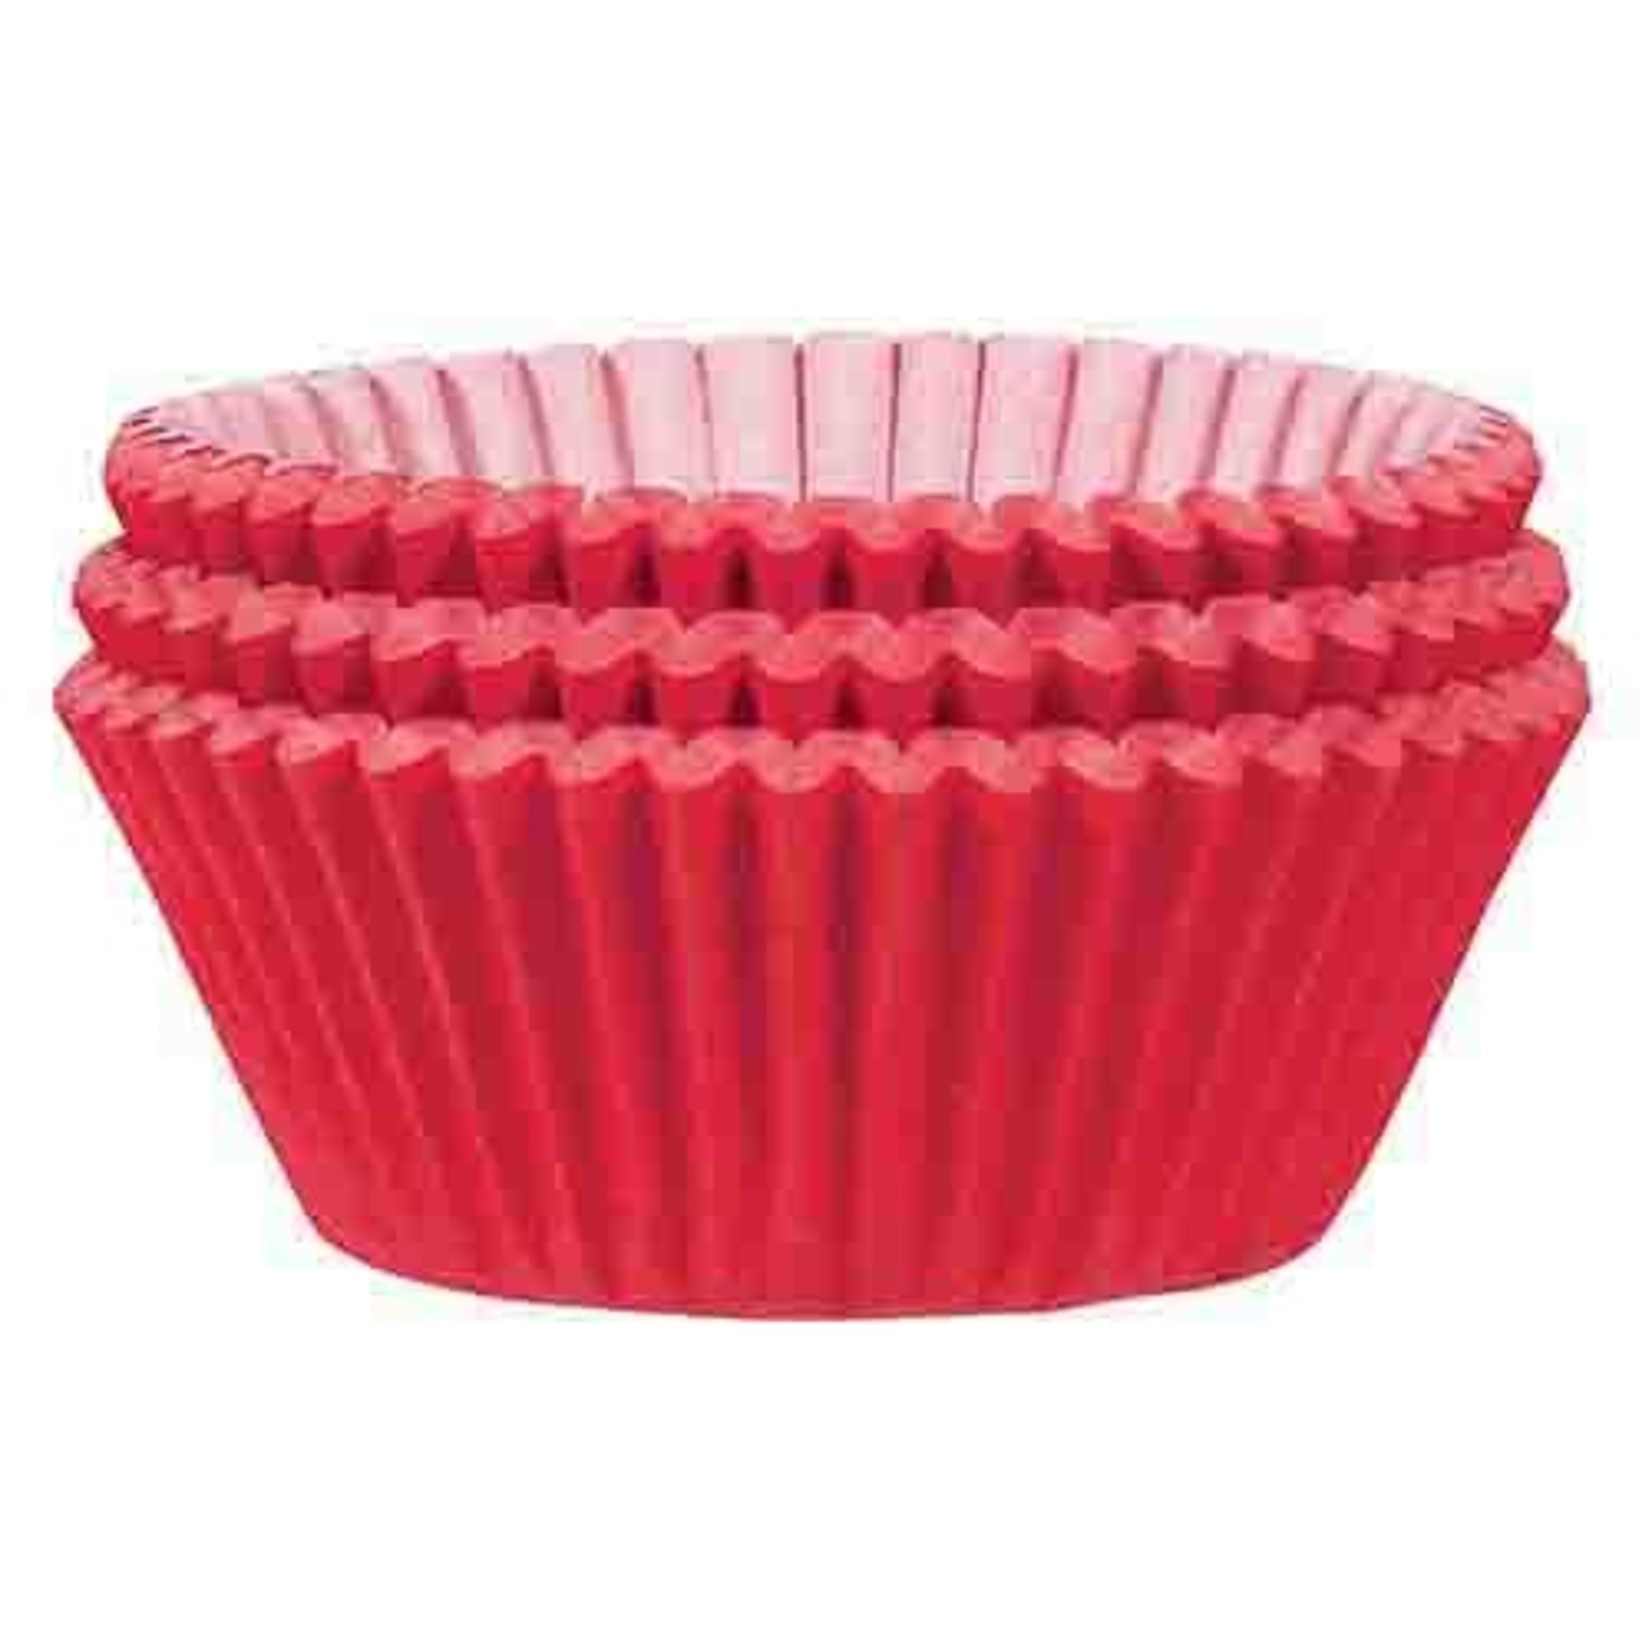 Amscan 2" Red Baking Cups - 75ct.